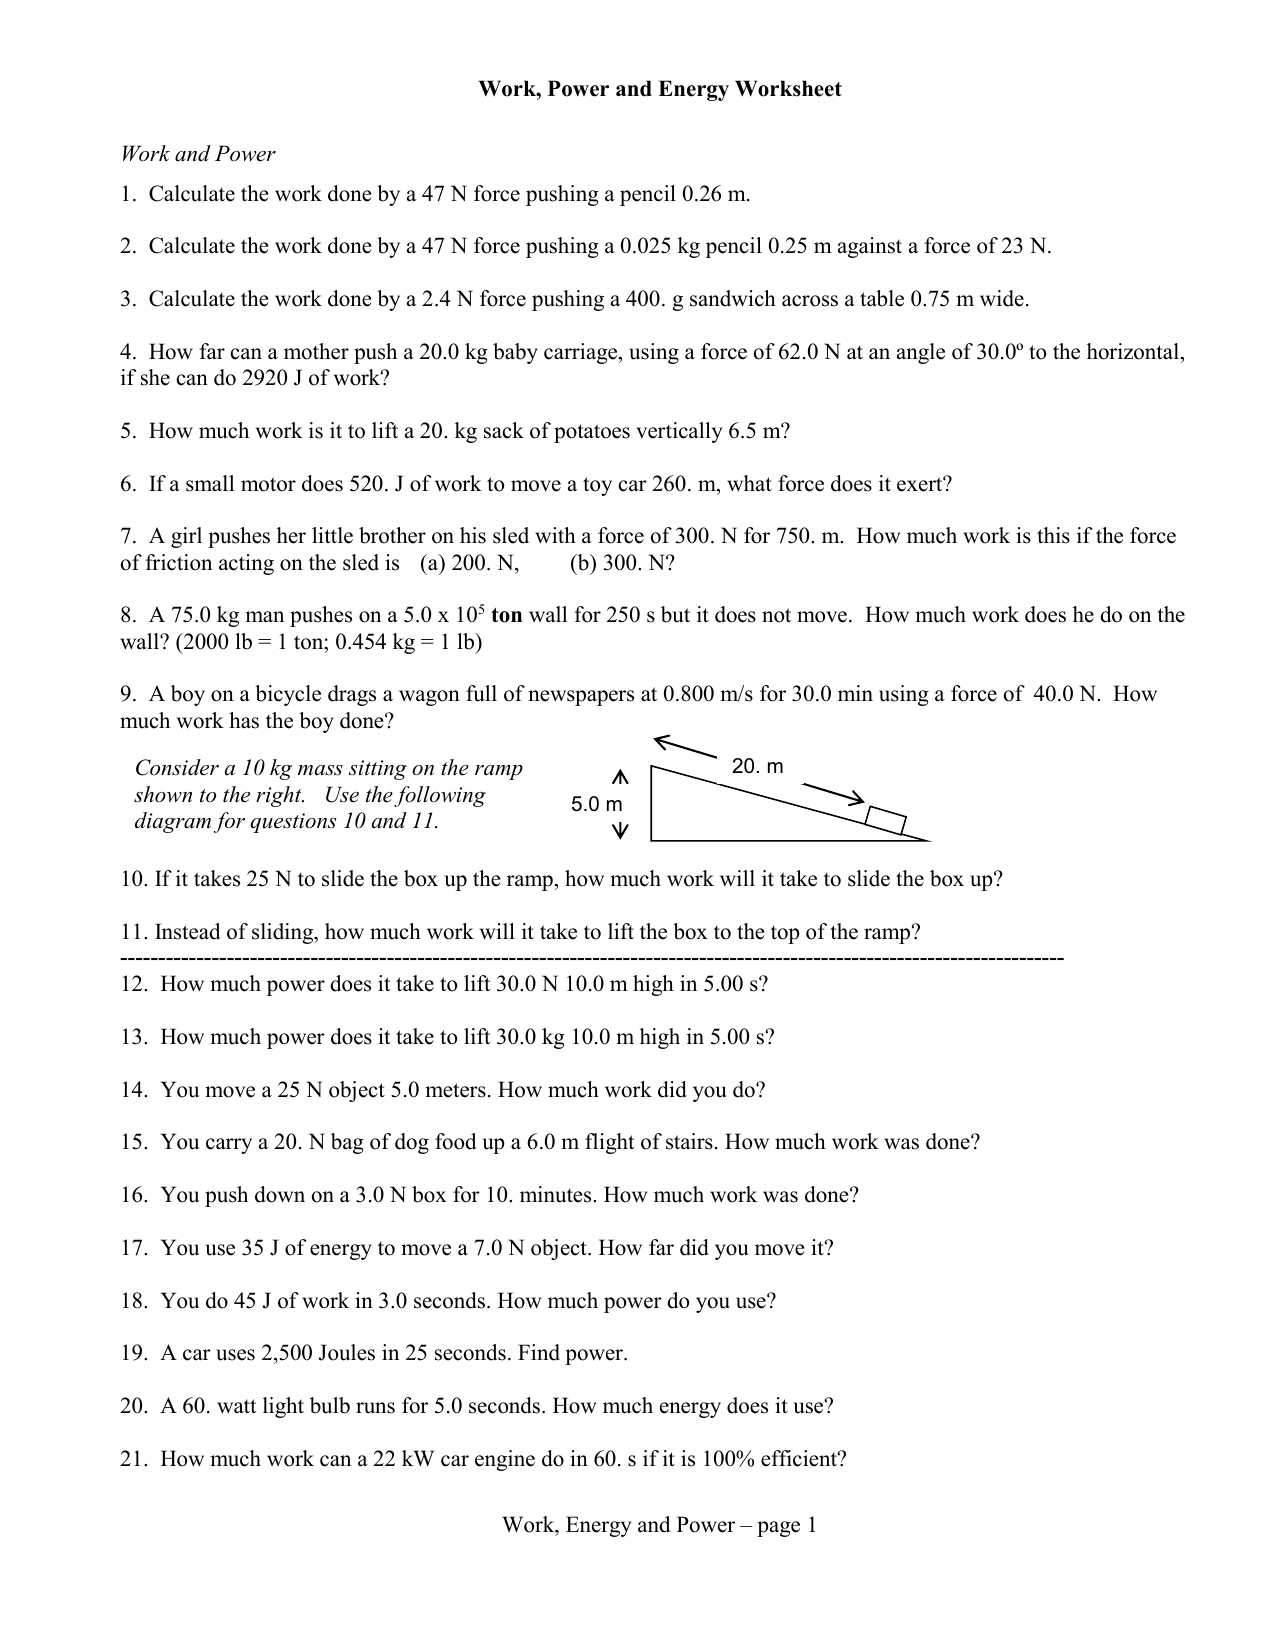 Kinetic and Potential Energy Worksheet Pdf together with Worksheet Electricity Pdf Kidz Activities